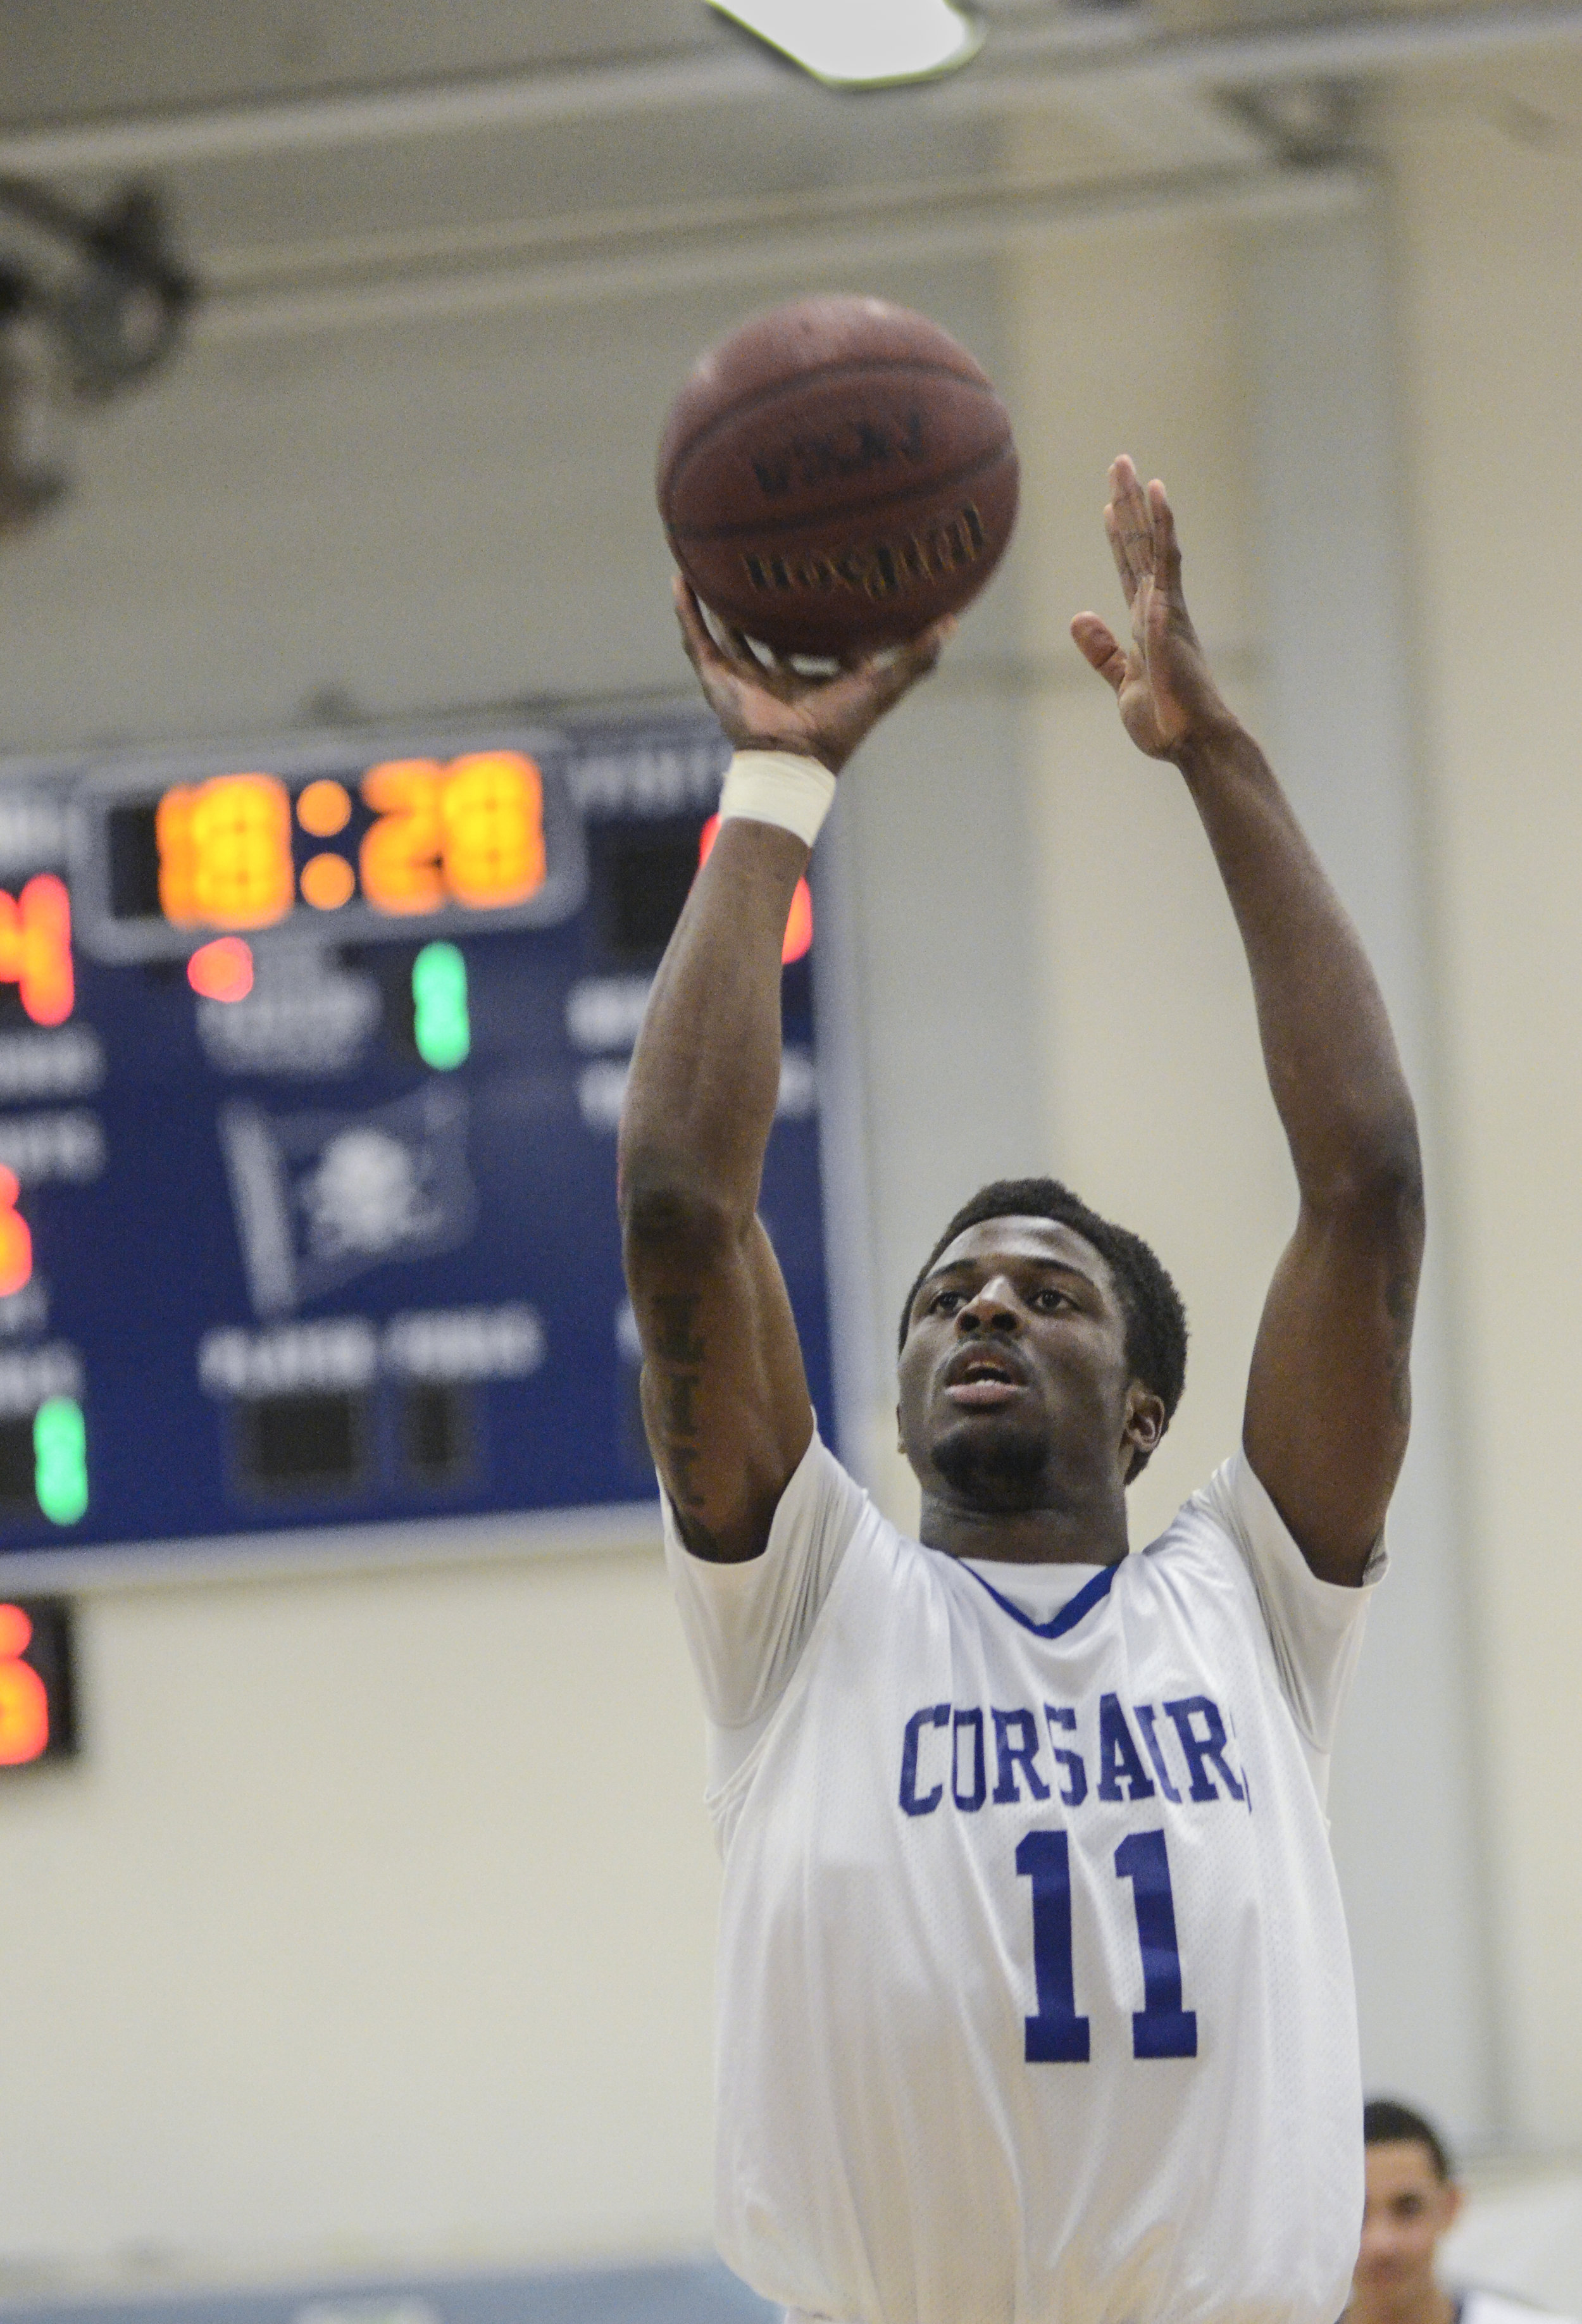  SMC freshman forward David Nwaba (11) goes for a shot. The SMC Corsairs beat the Citrus College Owls 73-68 on Wednesday, February 13, 2013 on the main campus of Santa Monica College in Santa Monica, Calif. Photo by Amy Gaskin. 